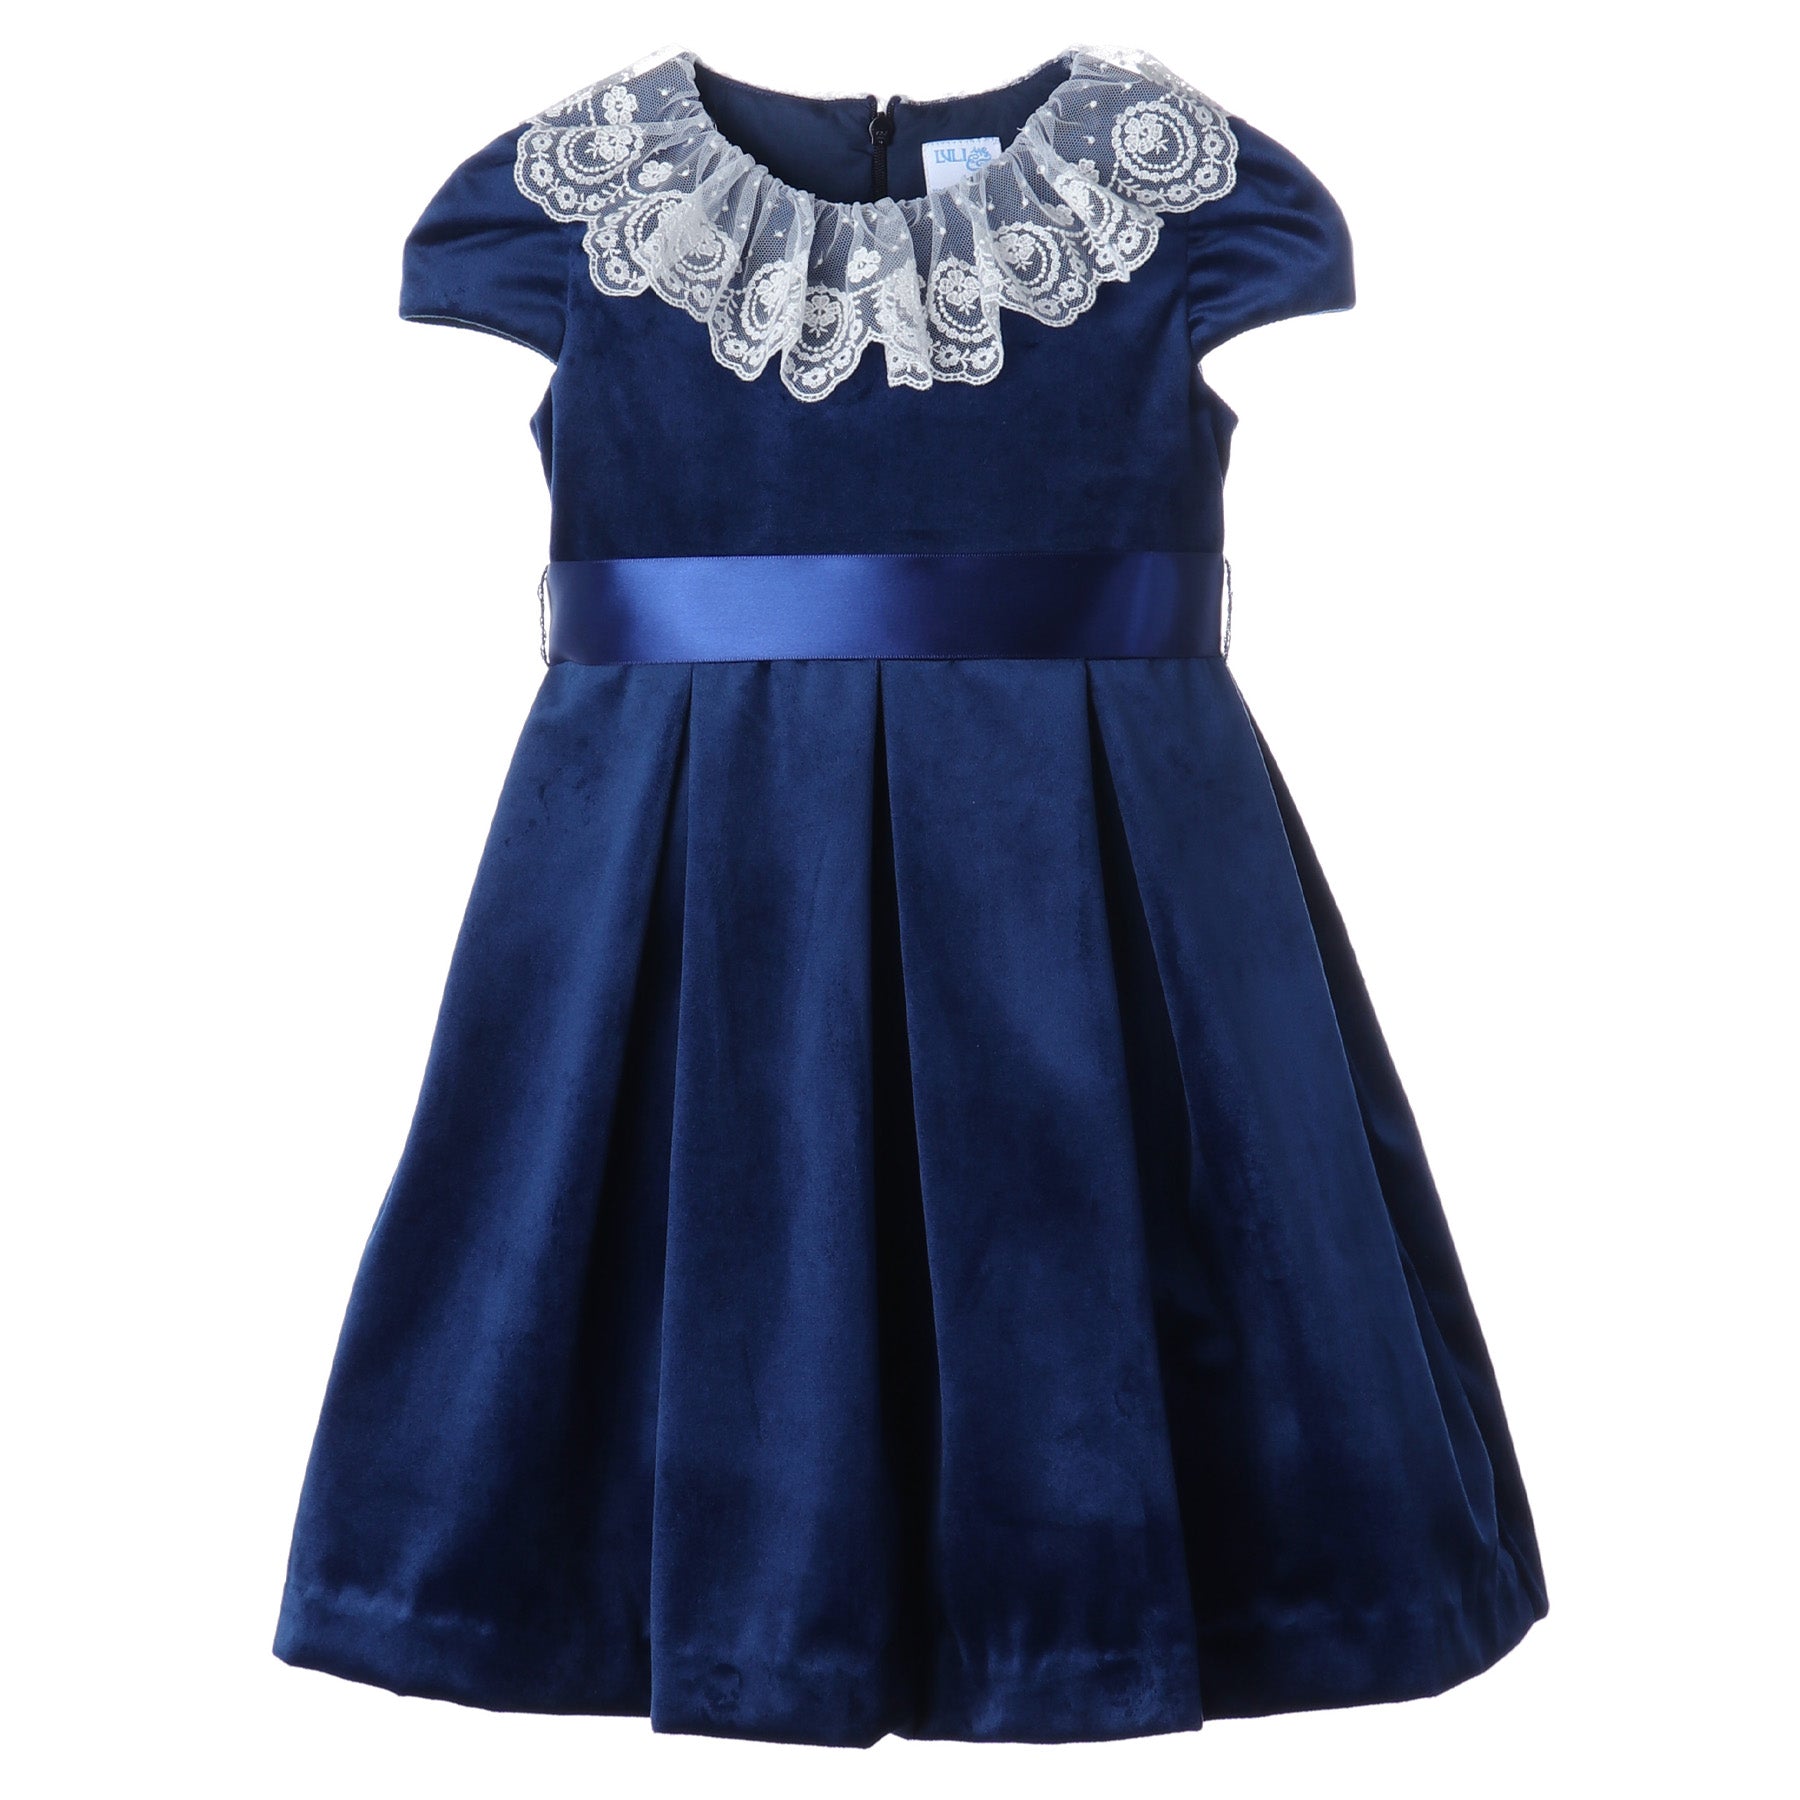 Navy Deluxe Velvet Dress With Lace